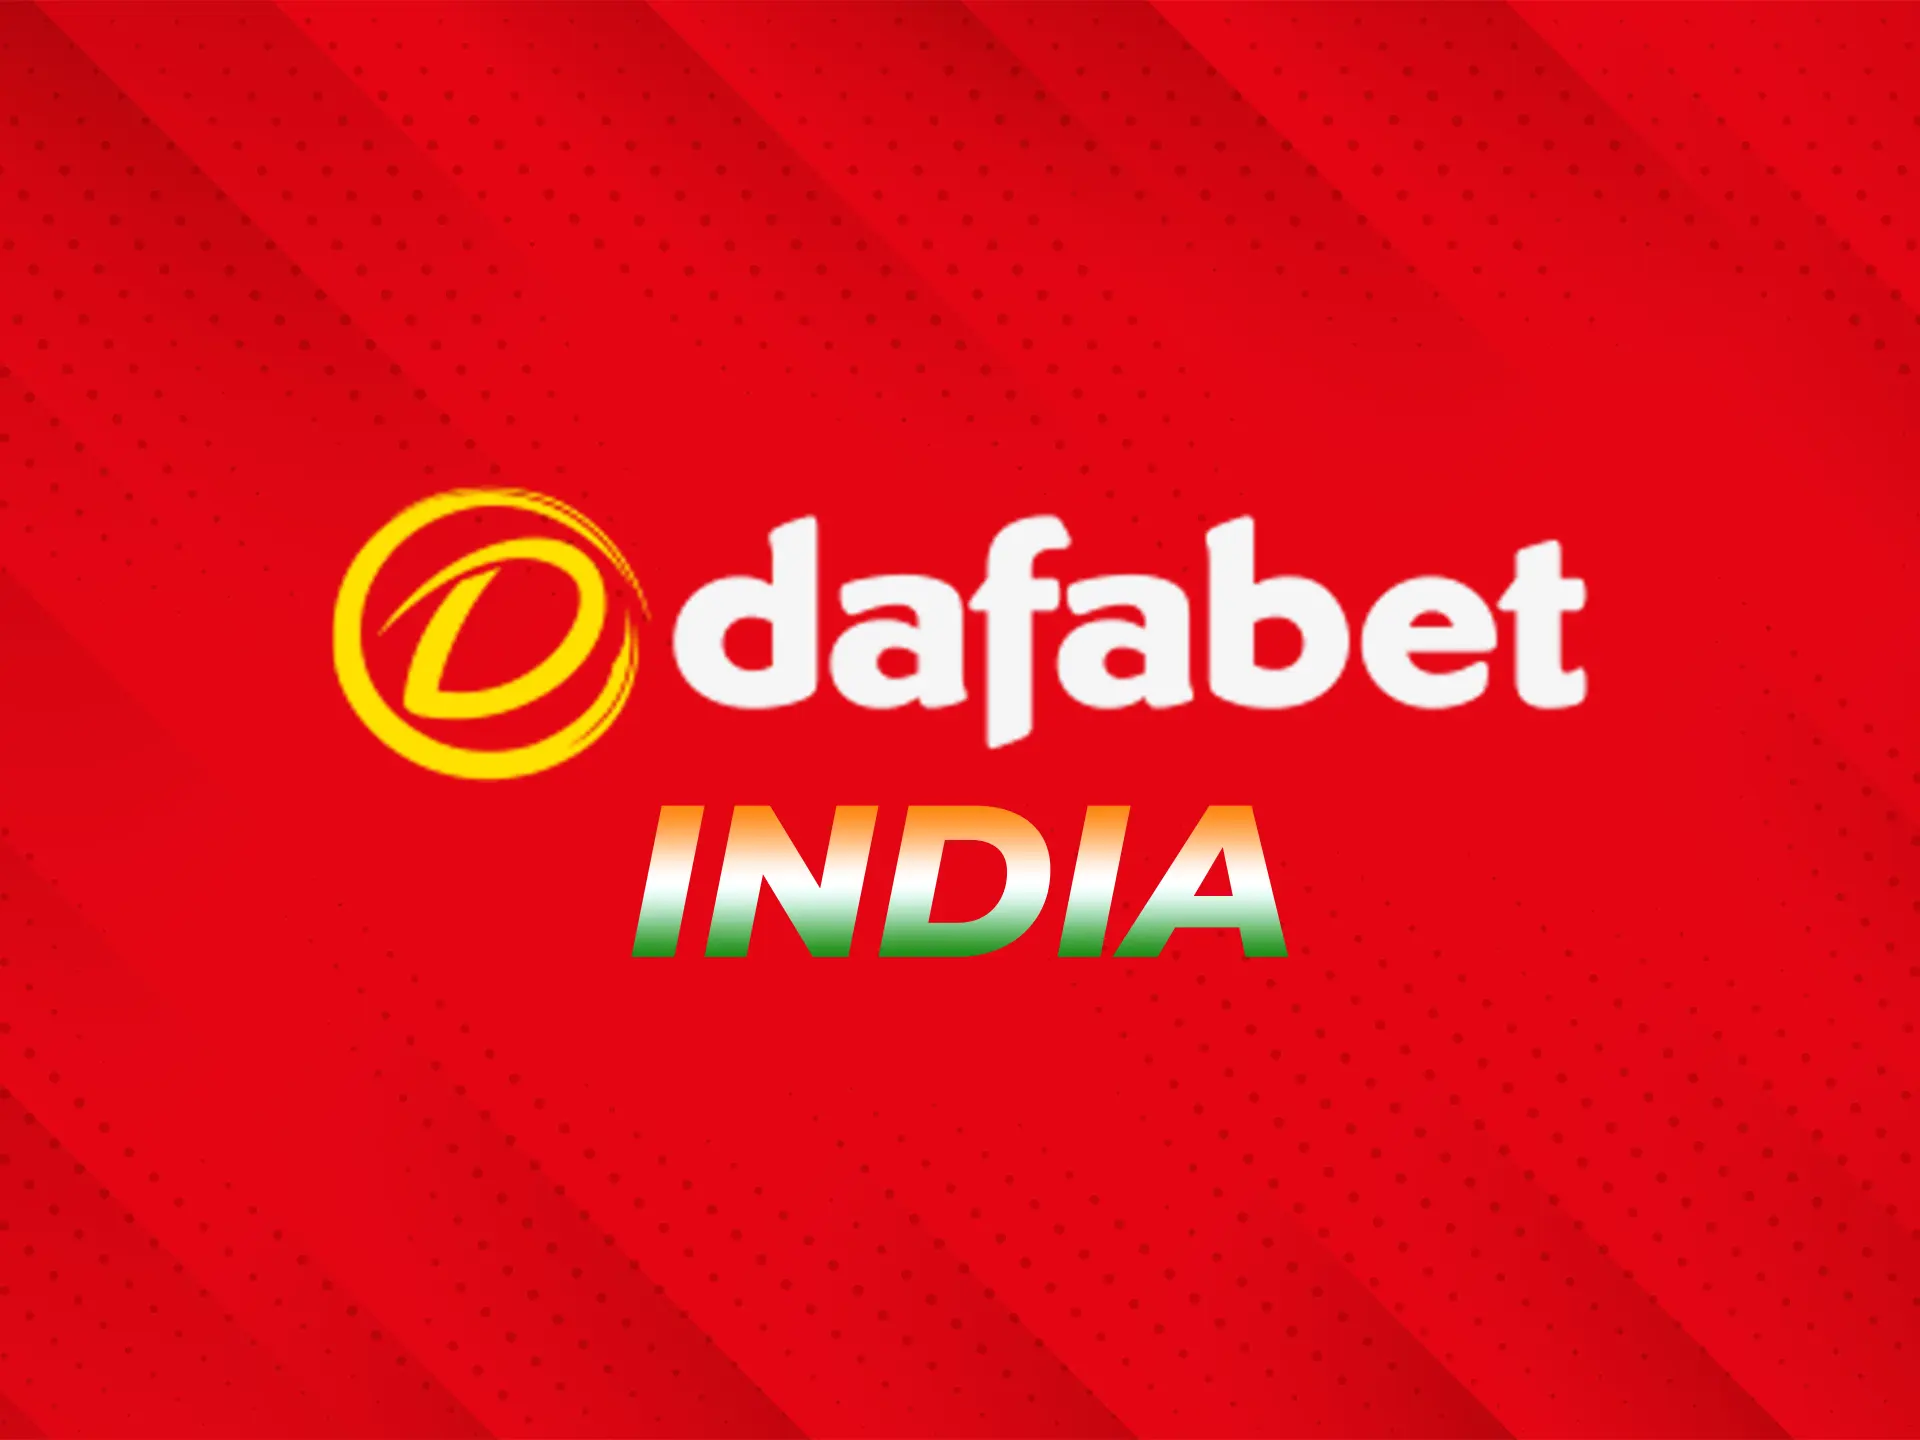 Information about Dafabet for Indian players.